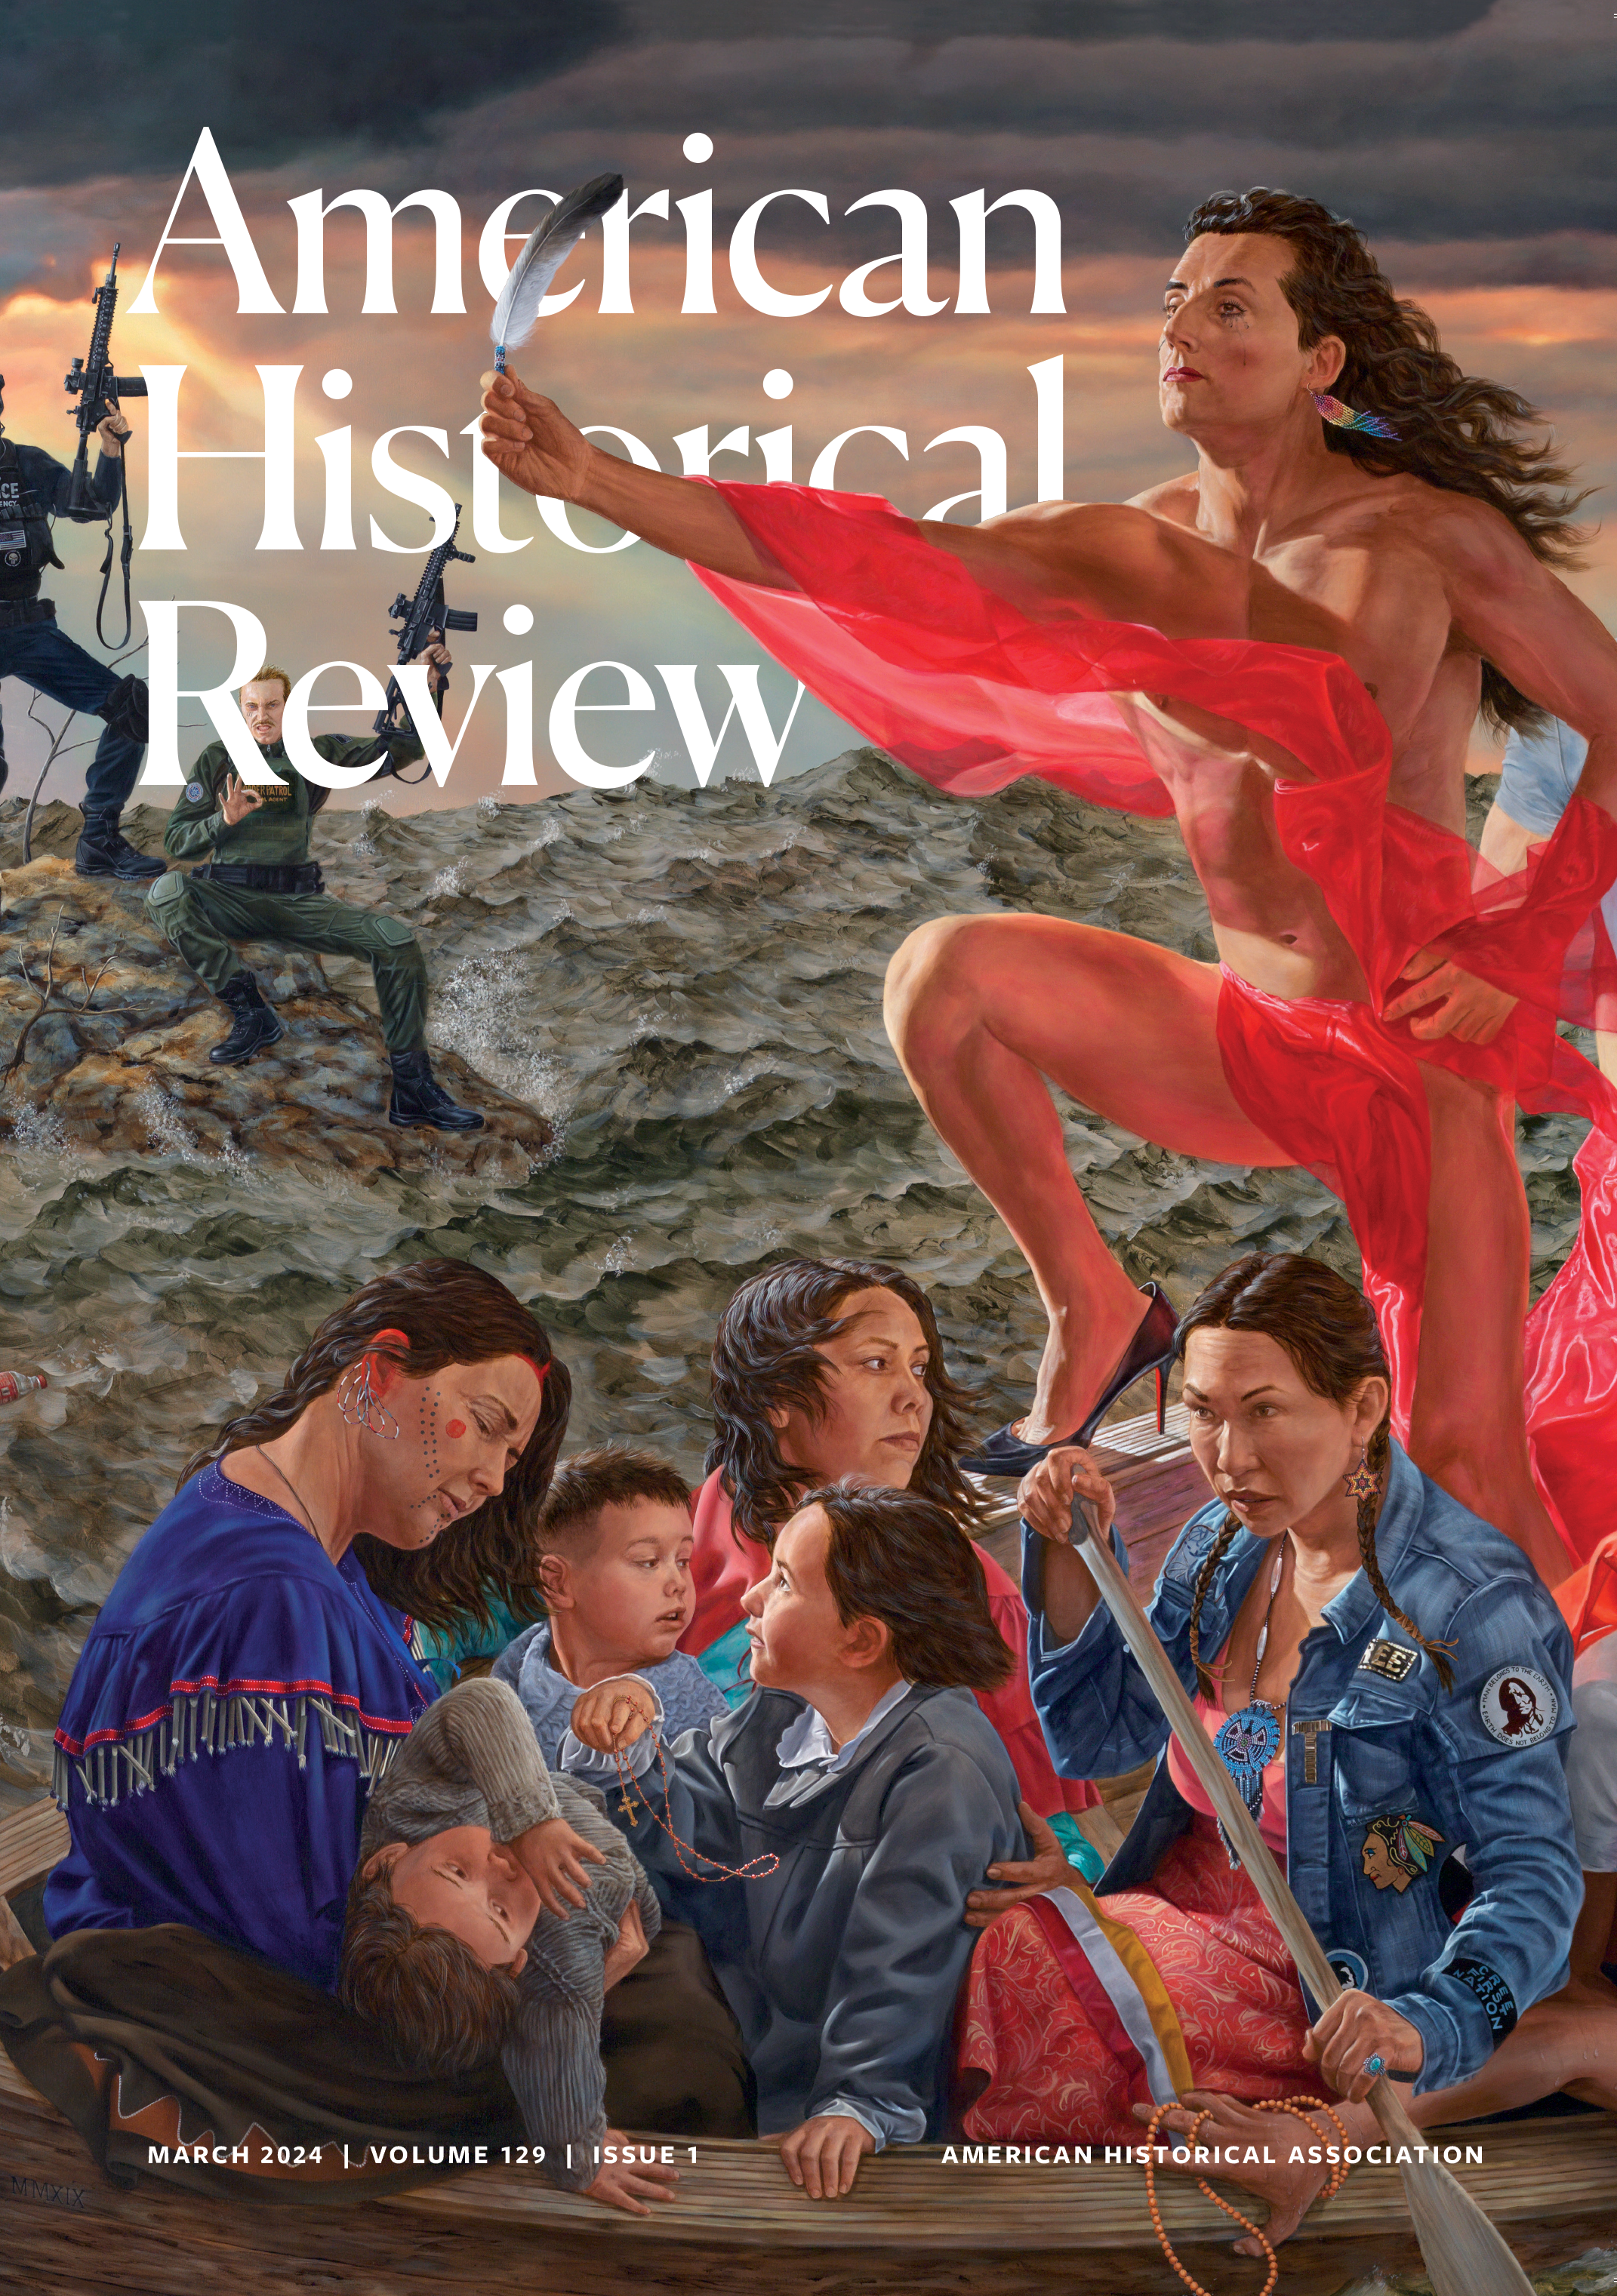 Cover of the March 2024 issue of the American Historical Review